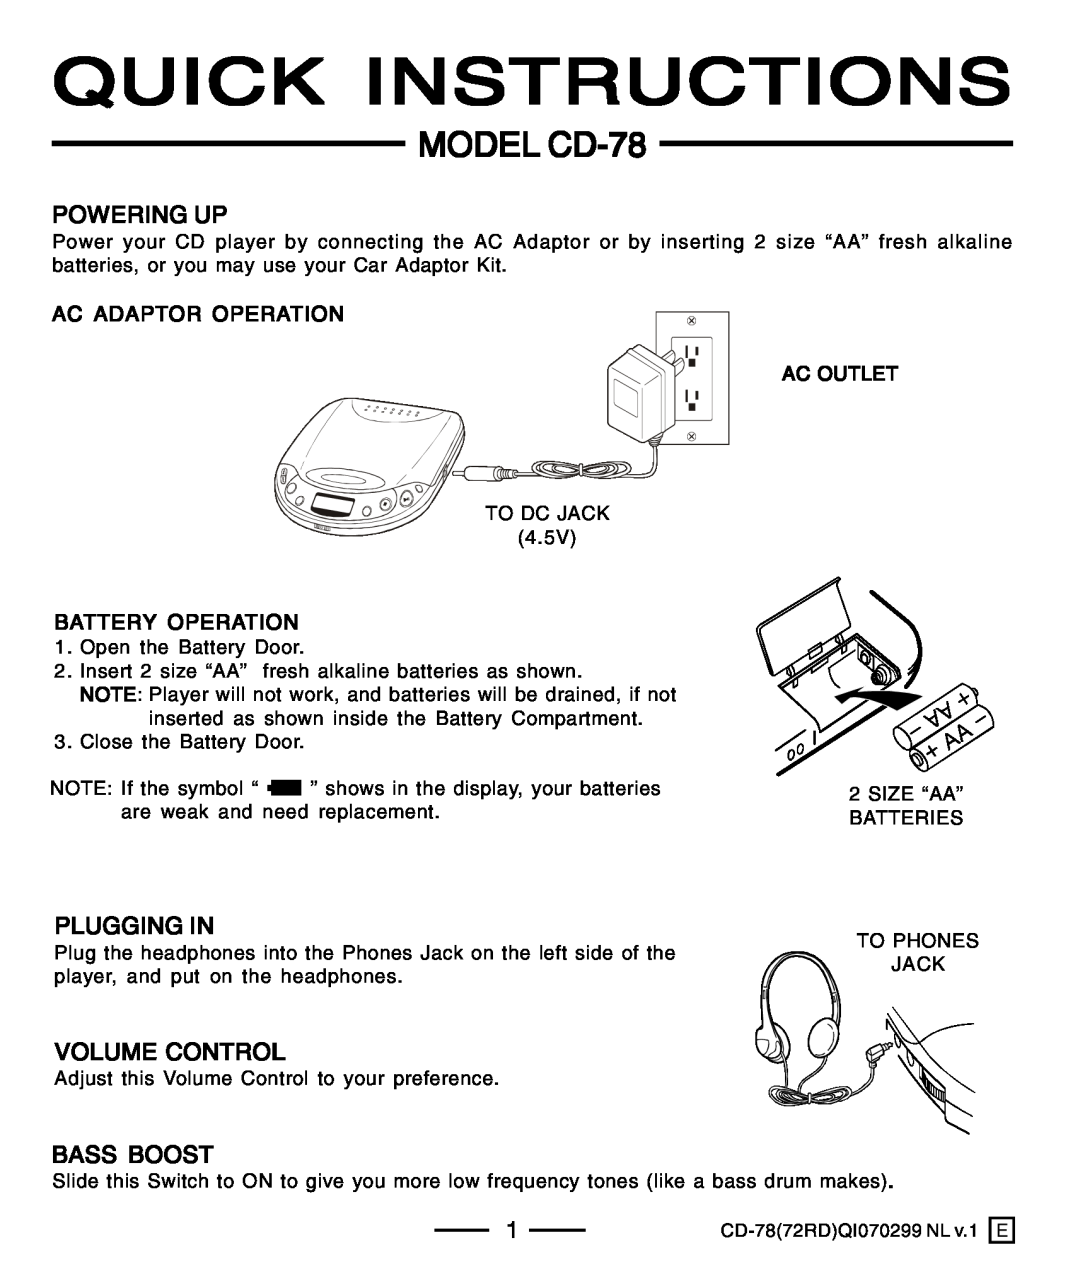 Lenoxx Electronics CD-78 Quick Instructions, Powering Up, Plugging In, Volume Control, Bass Boost, Ac Adaptor Operation 